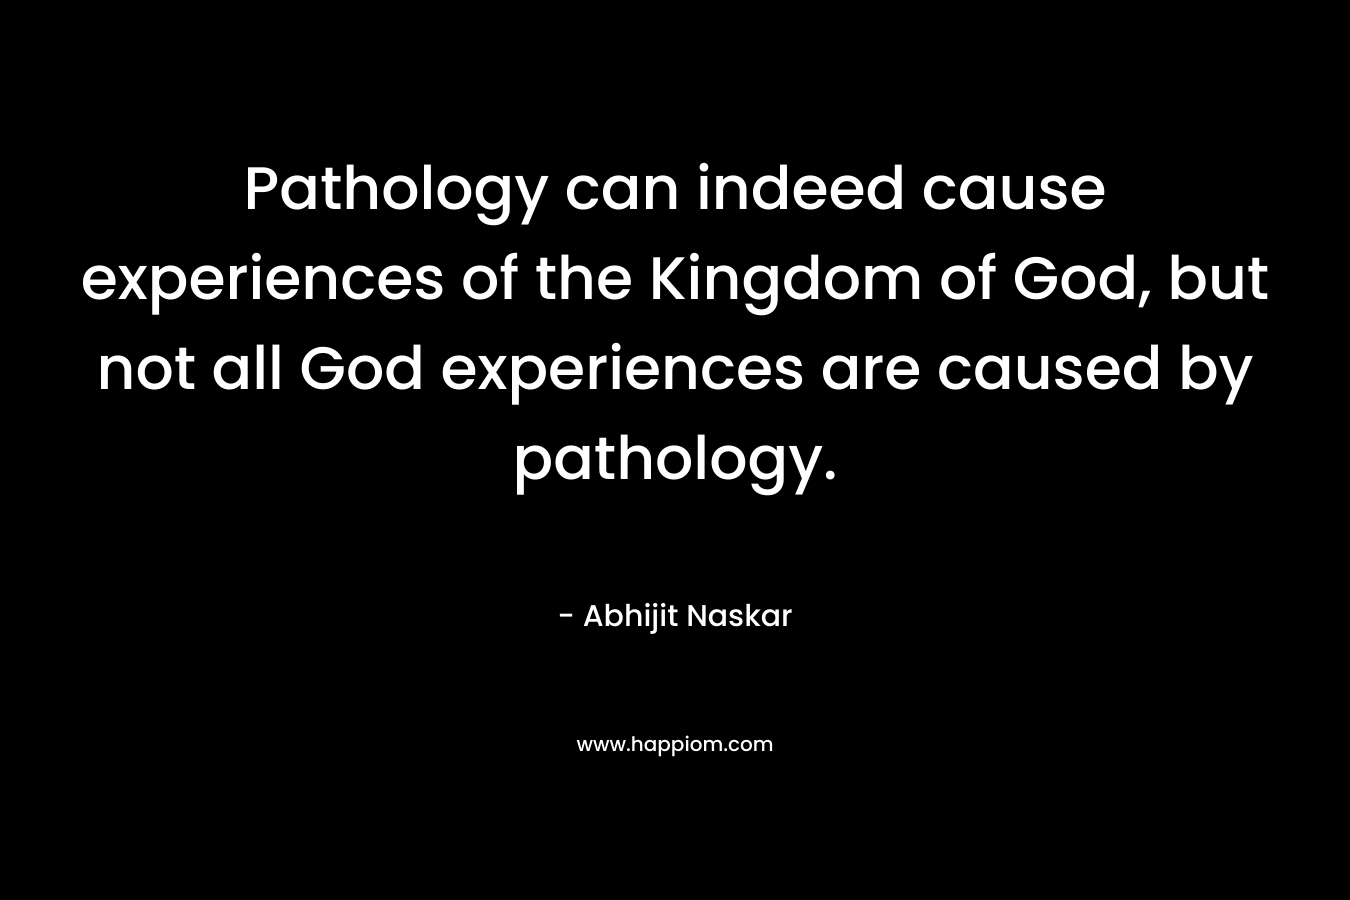 Pathology can indeed cause experiences of the Kingdom of God, but not all God experiences are caused by pathology.